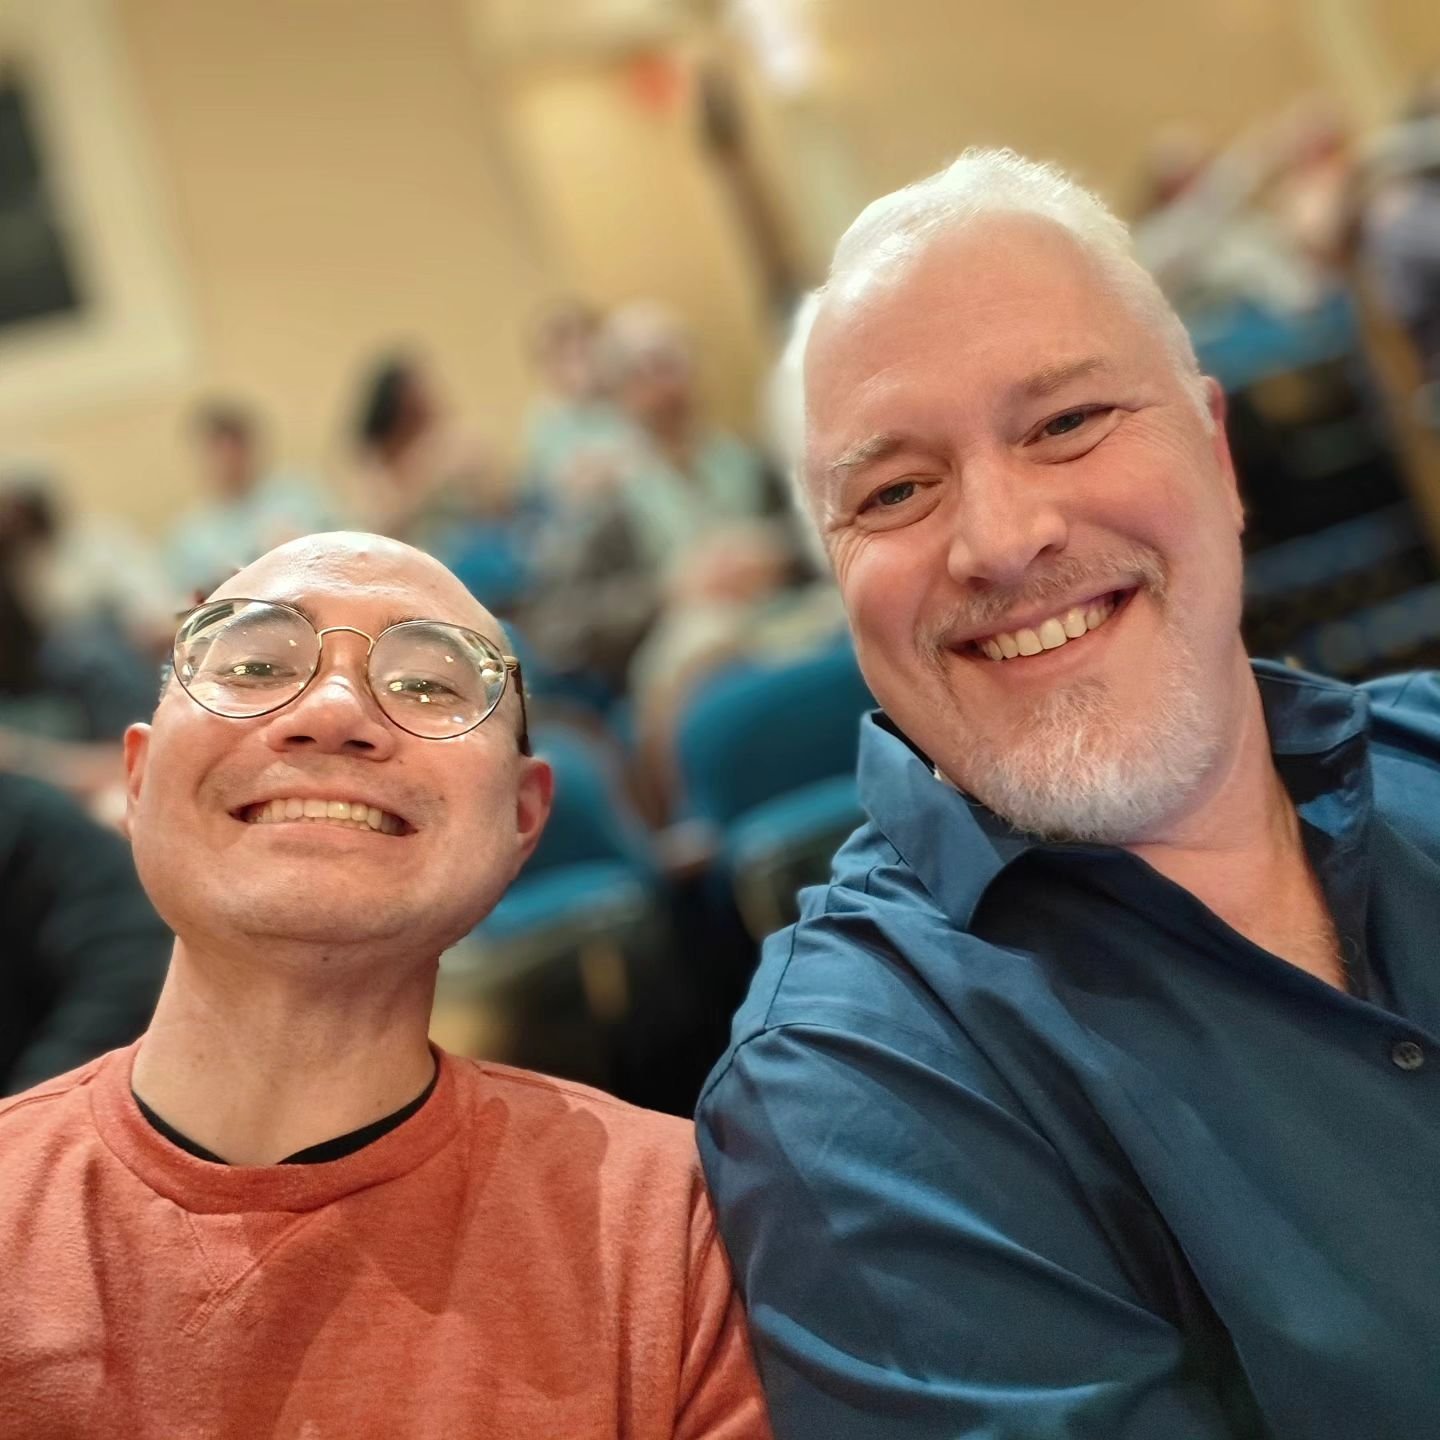 Witnessed the end of an era last night as we celebrated our friend, mentor and former teacher, Maestro Tonu Kalam, who took the stage for the last time as Music Director of the @uncchapelhill Symphony Orchestra... after being on the faculty for 36 ye